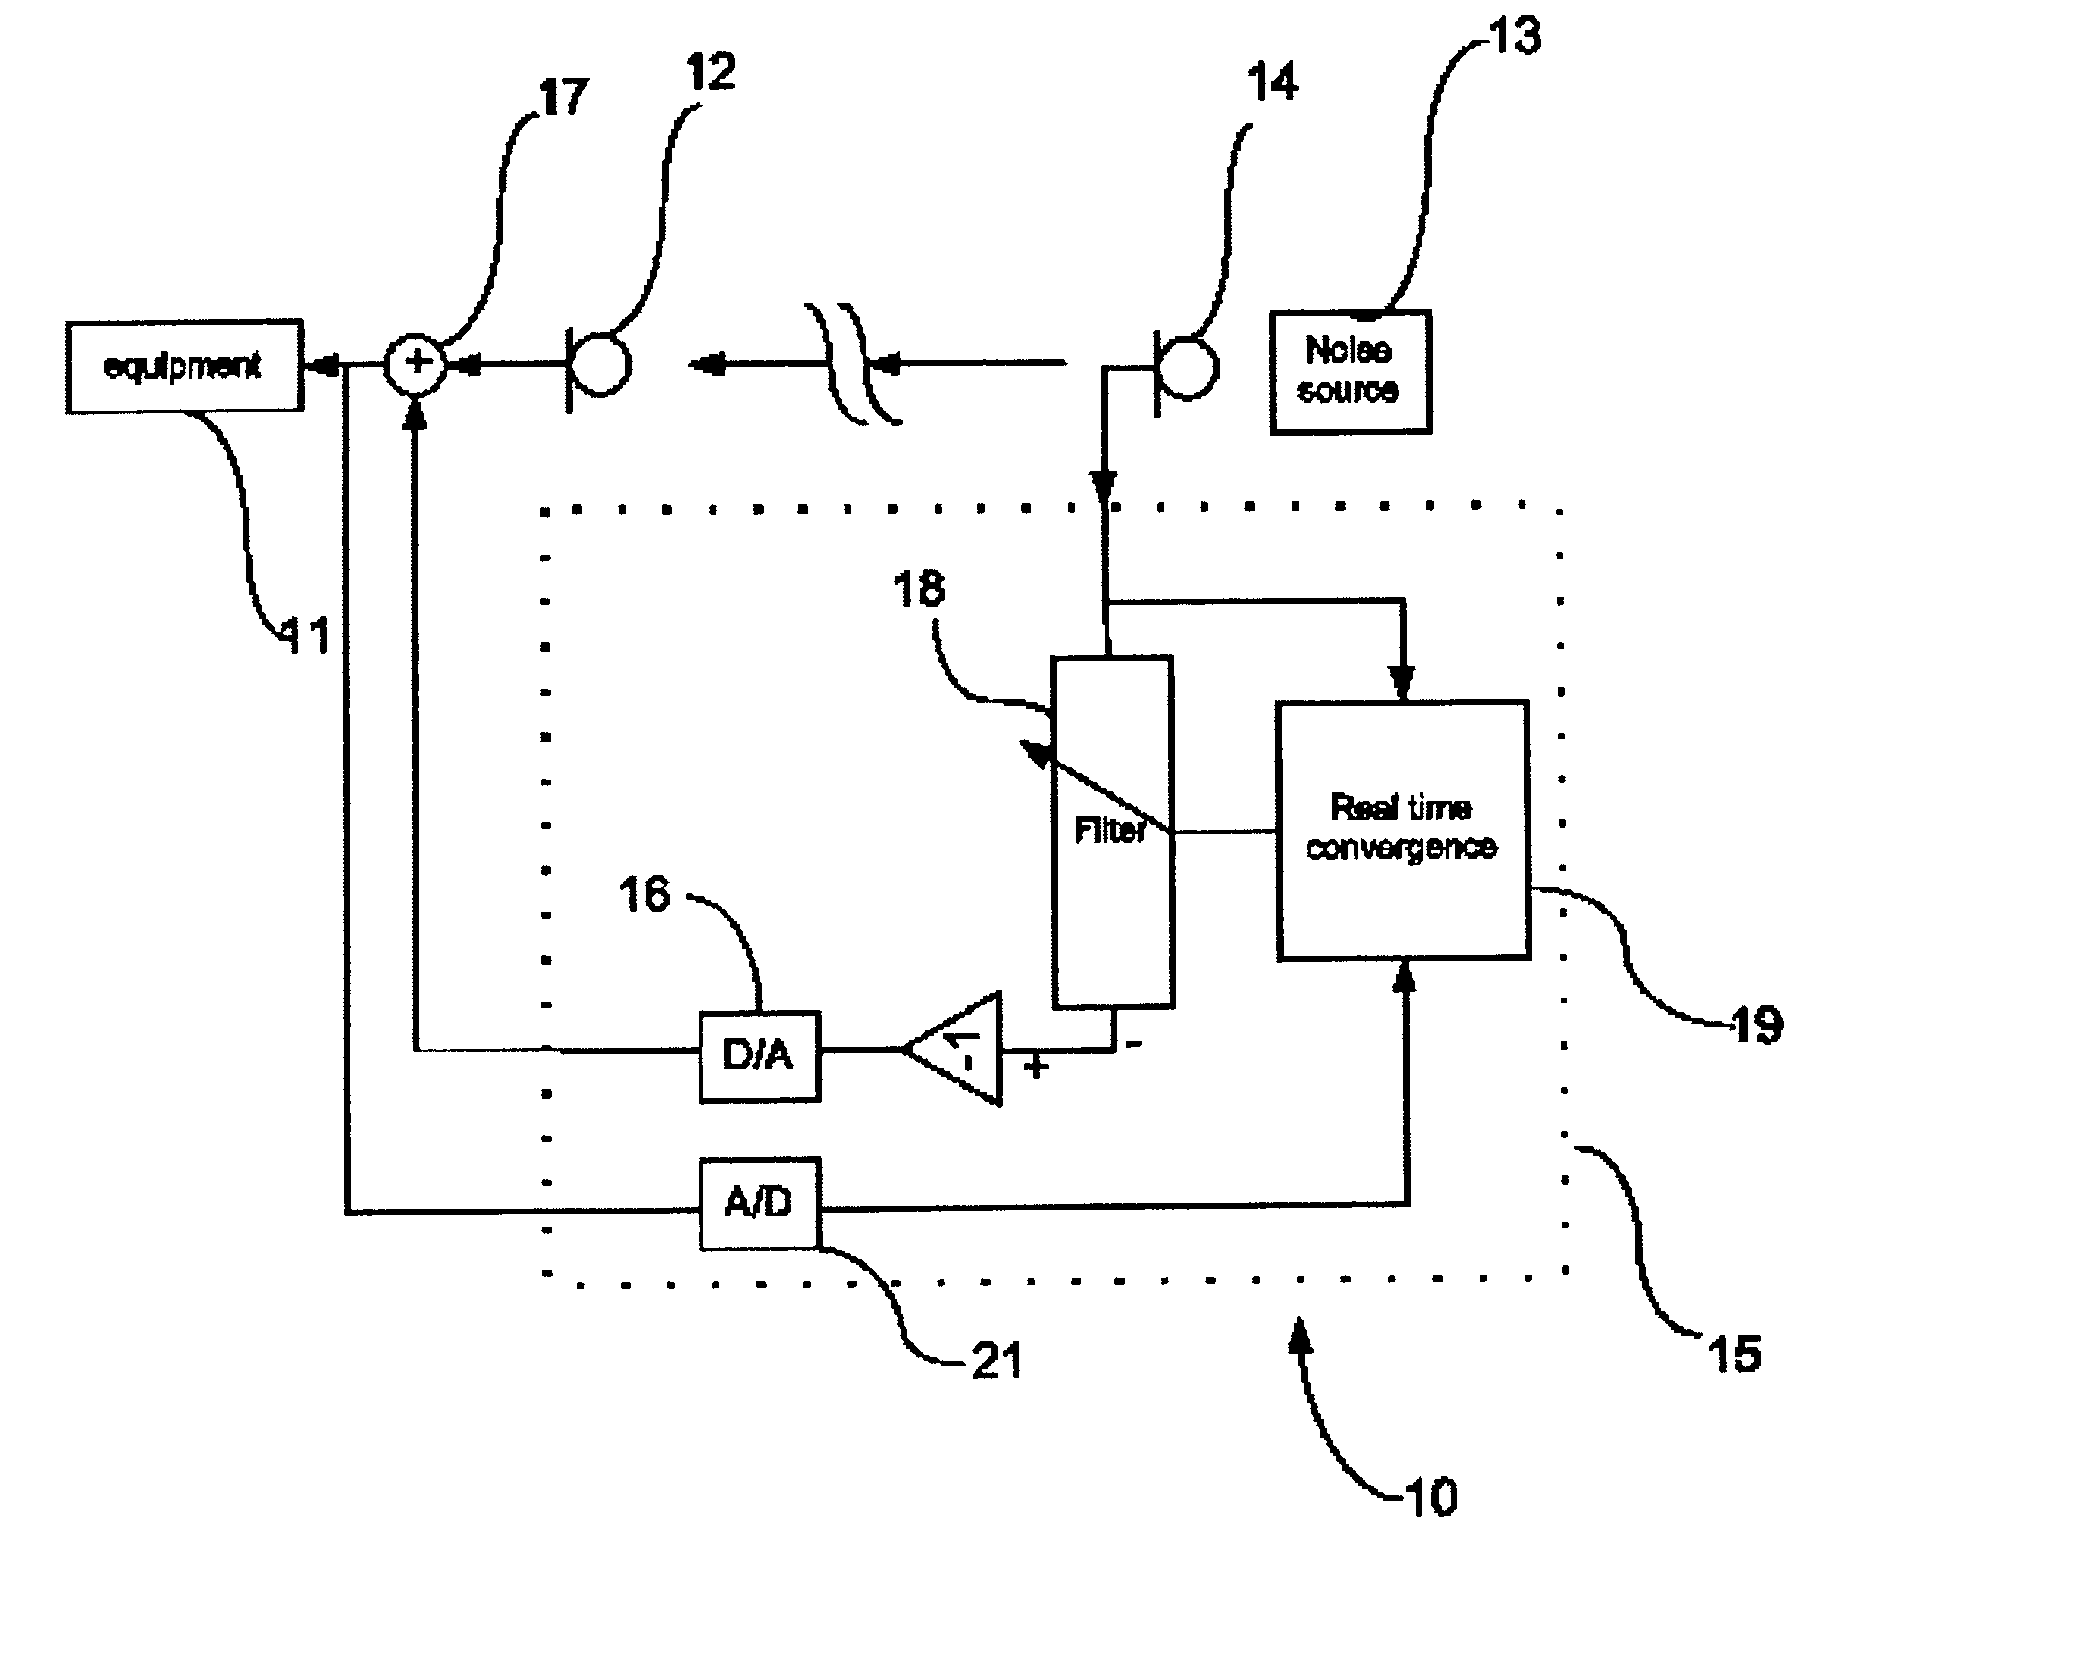 Method and system for inhibiting noise produced by one or more sources of undesired sound from pickup by a speech recognition unit